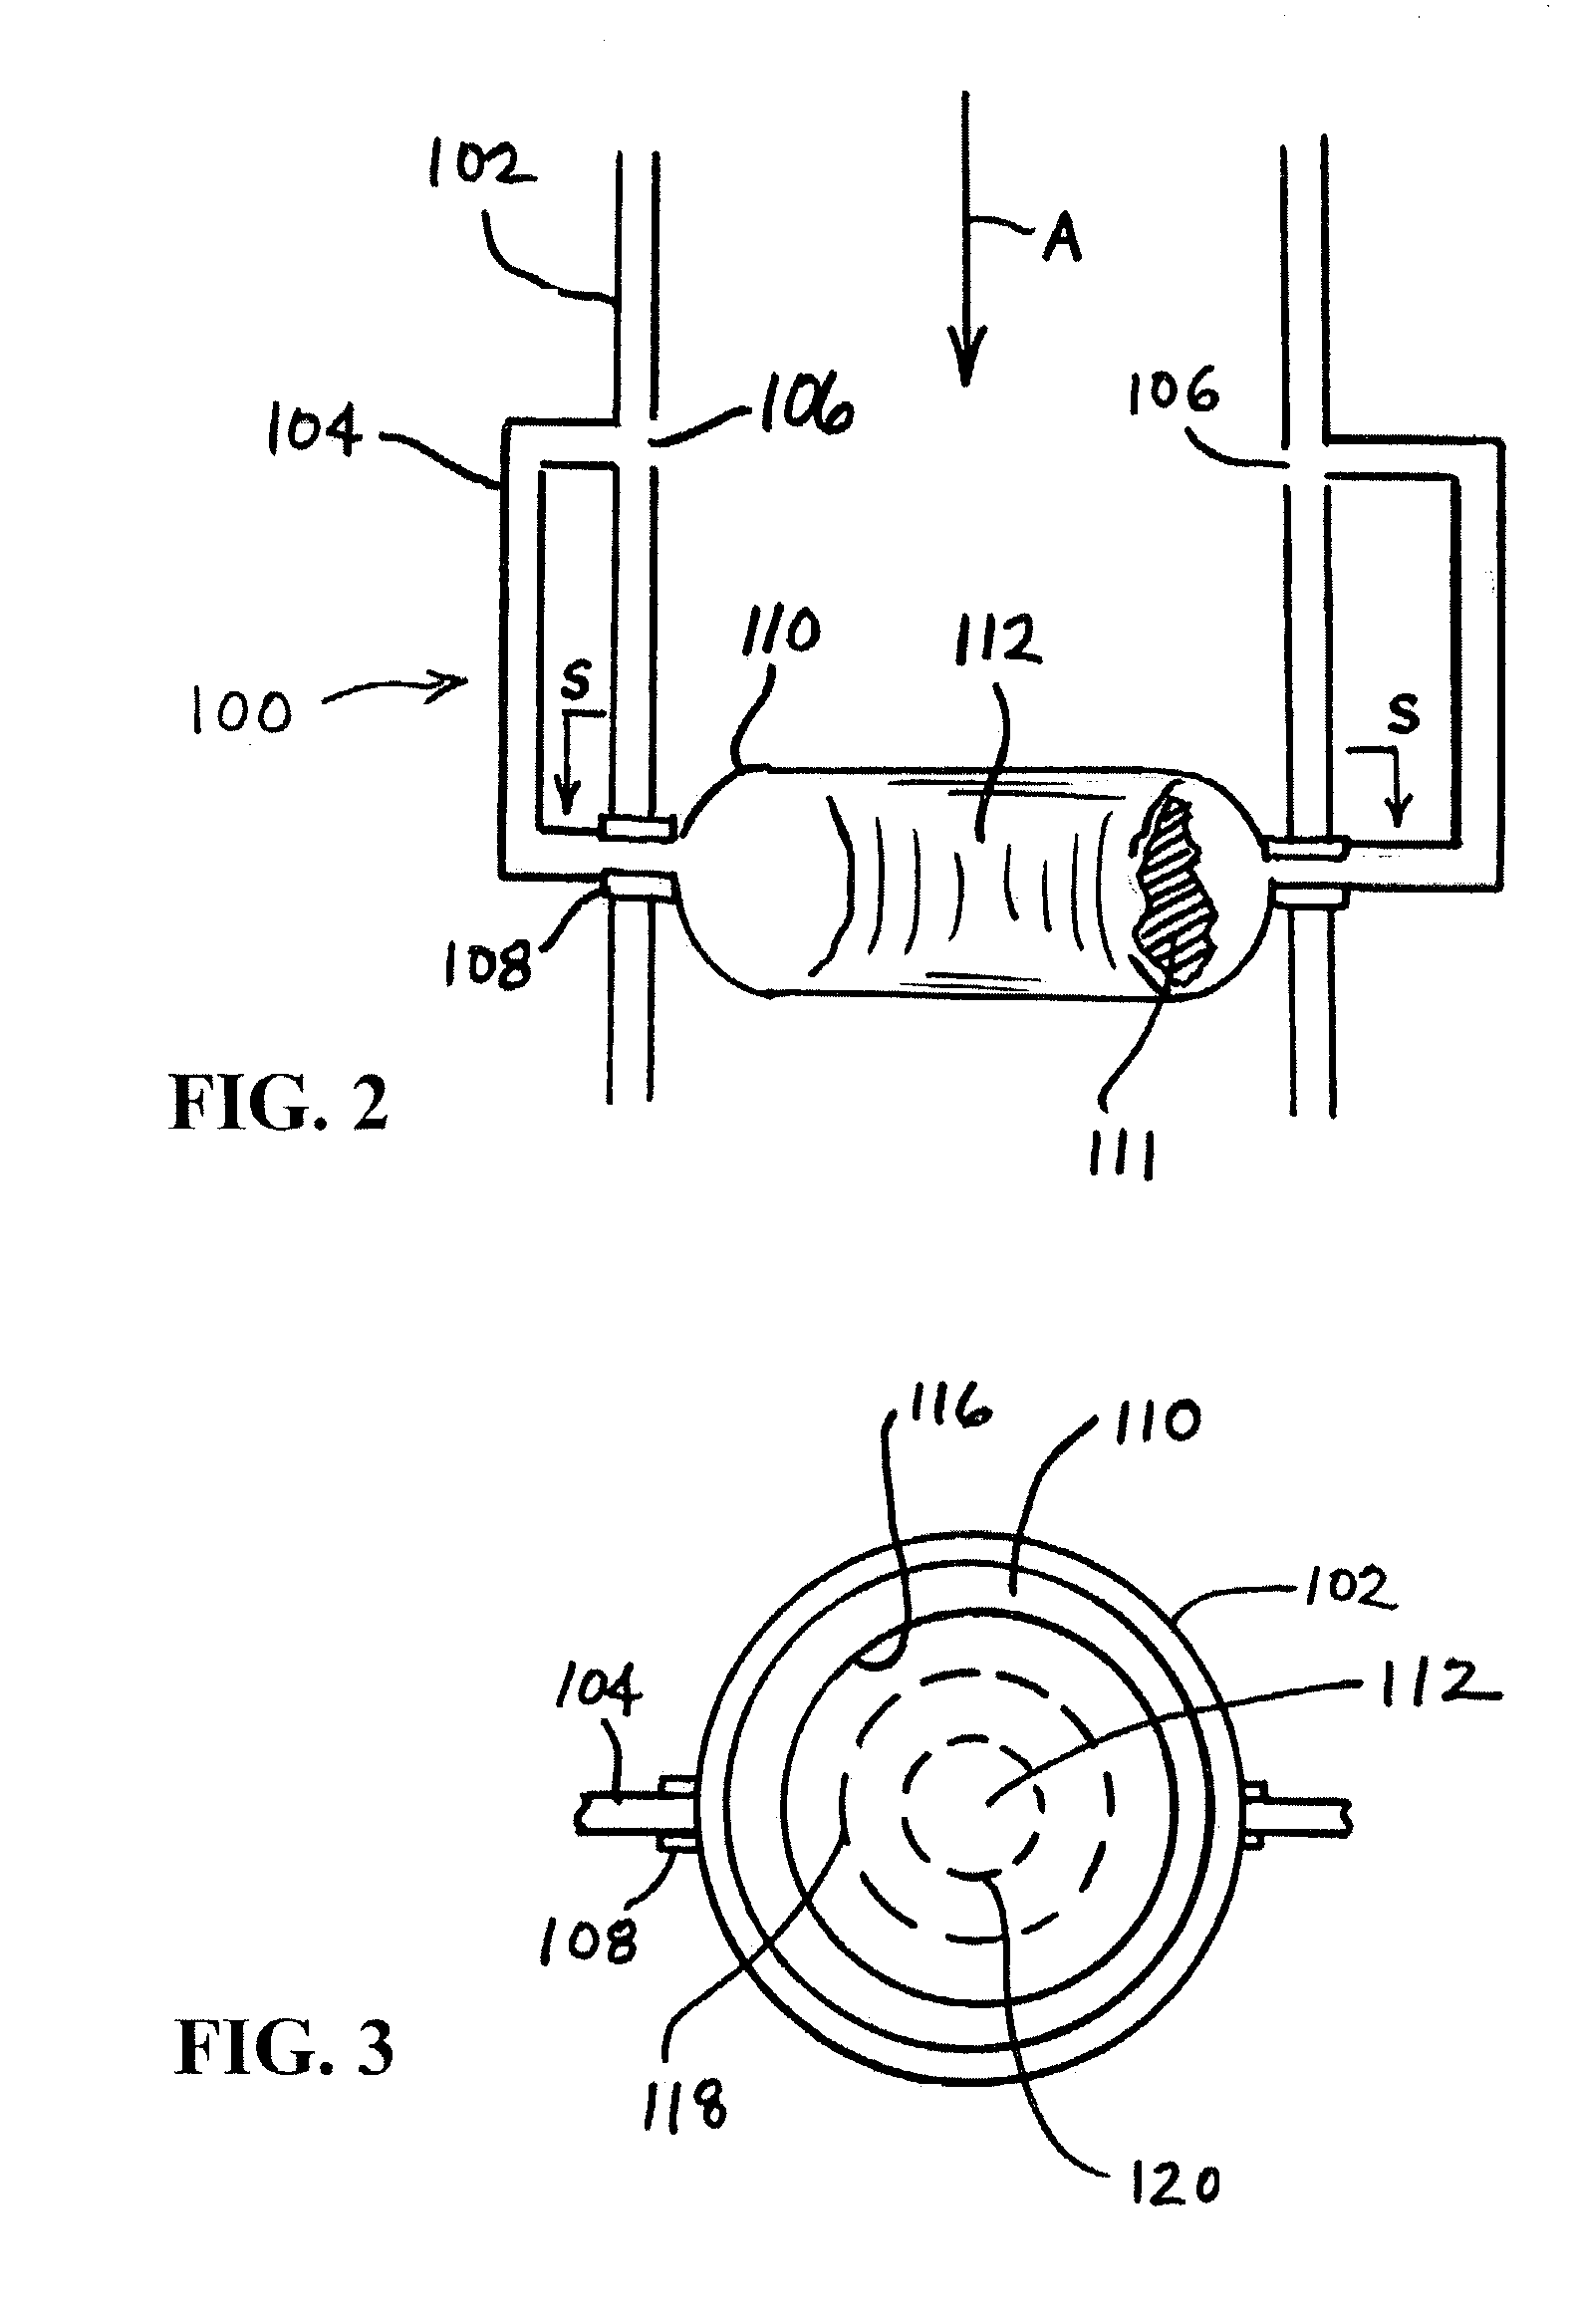 Gas storage and dispensing system for variable conductance dispensing of gas at constant flow rate